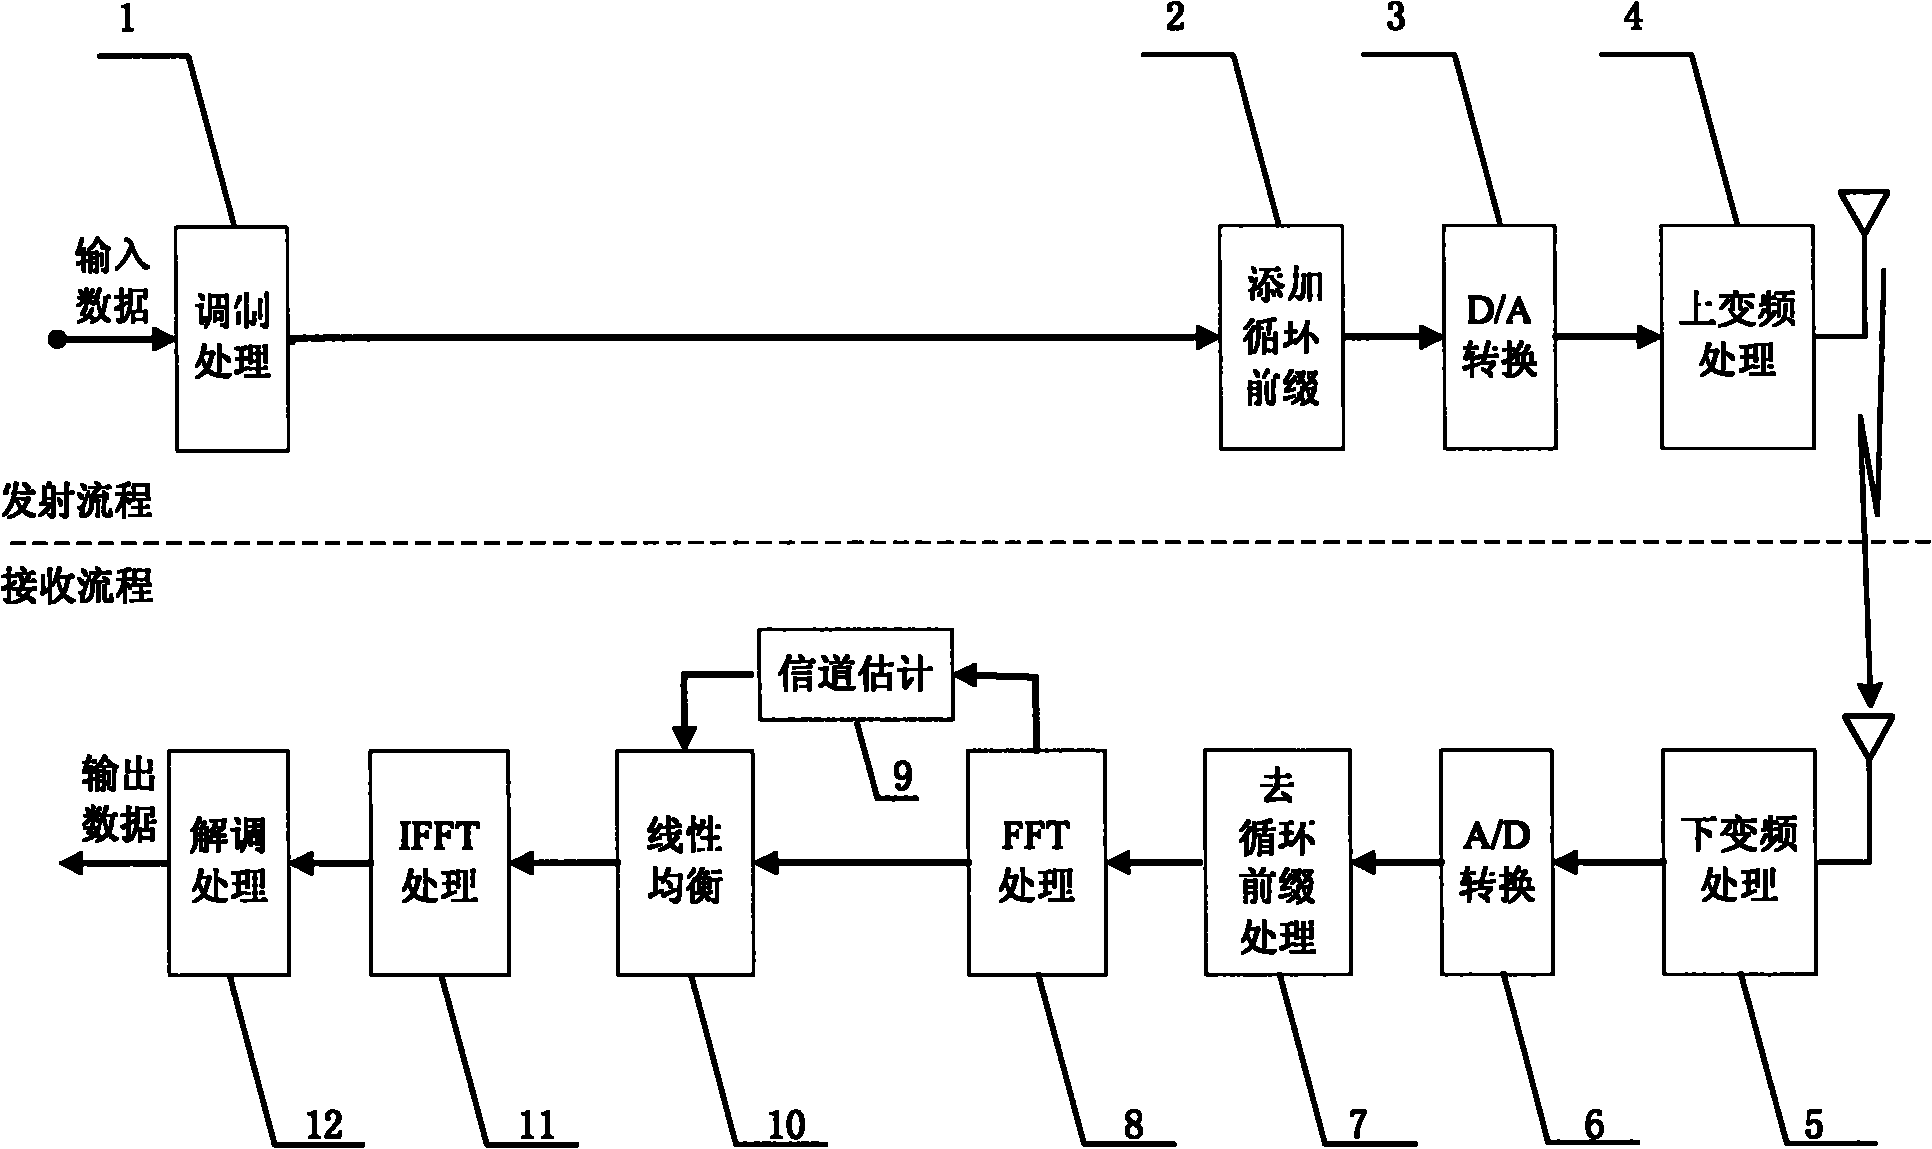 Receiving processing method in single-carrier wireless communication system